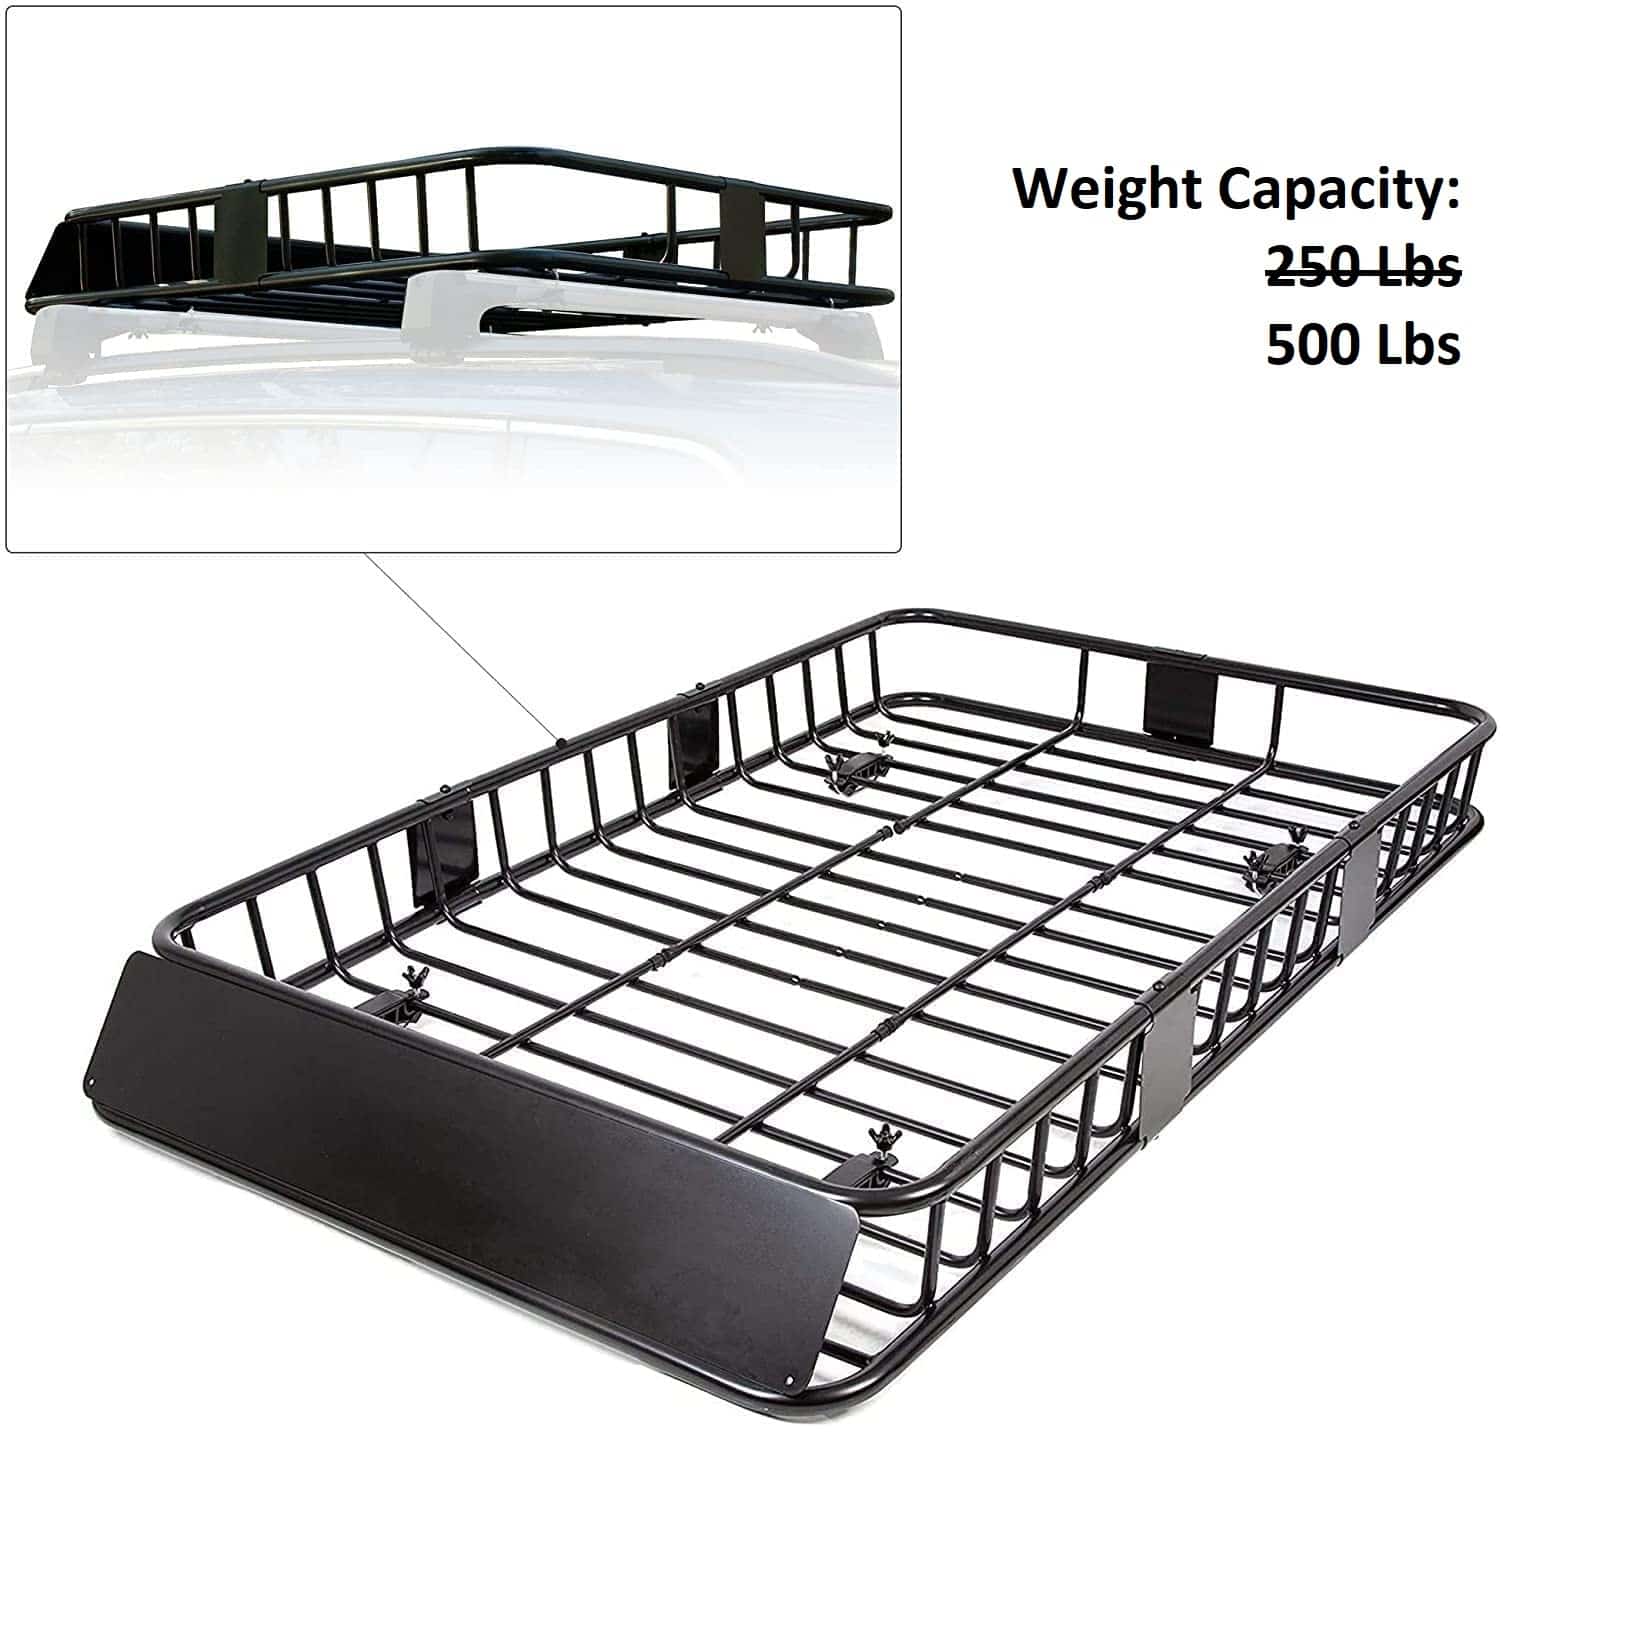 Roof Rack Basket Rooftop Cargo Carrier&Extension Top Luggage Holder 64 For  SUV